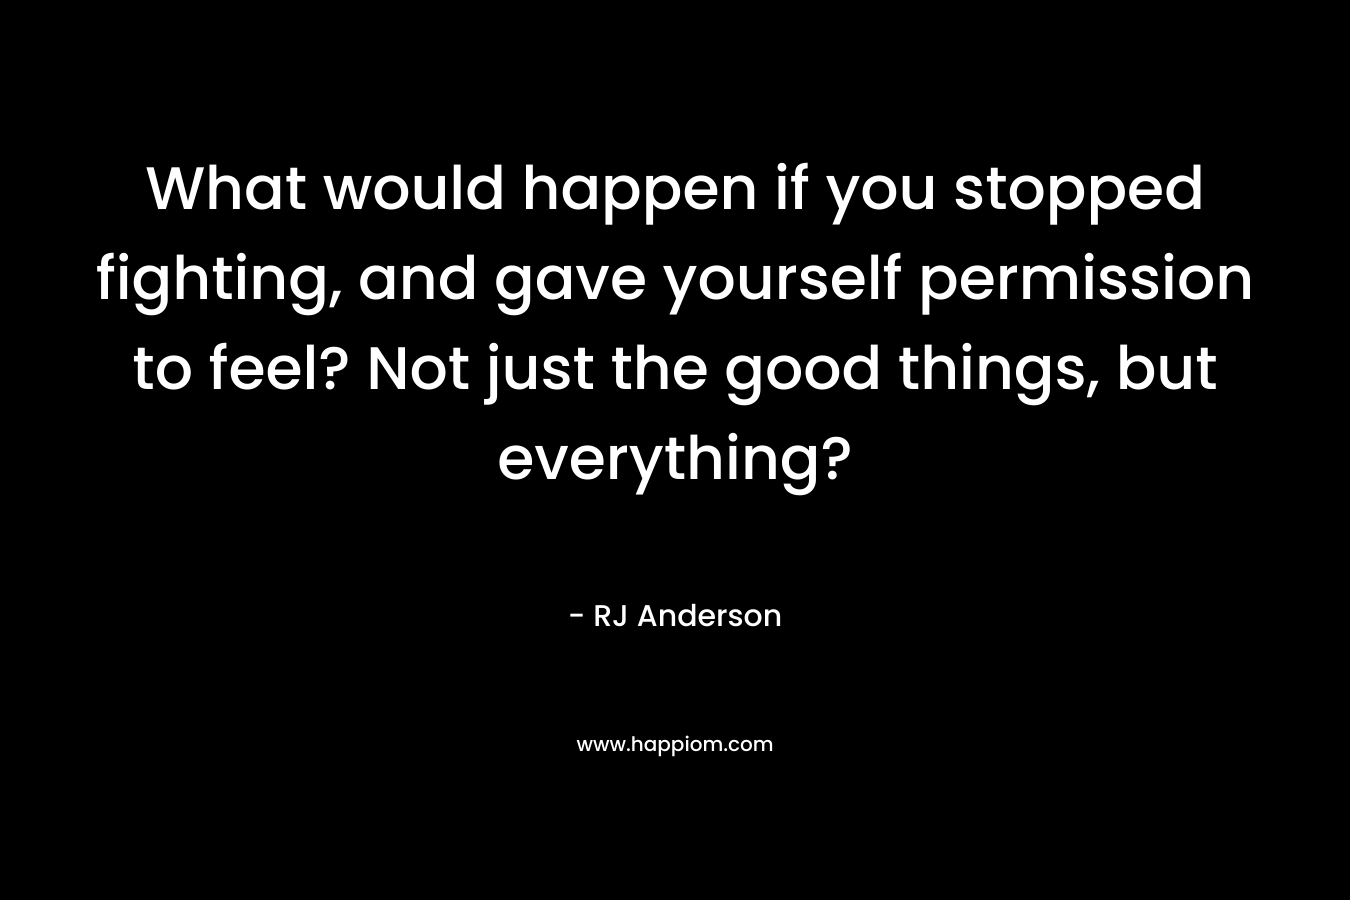 What would happen if you stopped fighting, and gave yourself permission to feel? Not just the good things, but everything?